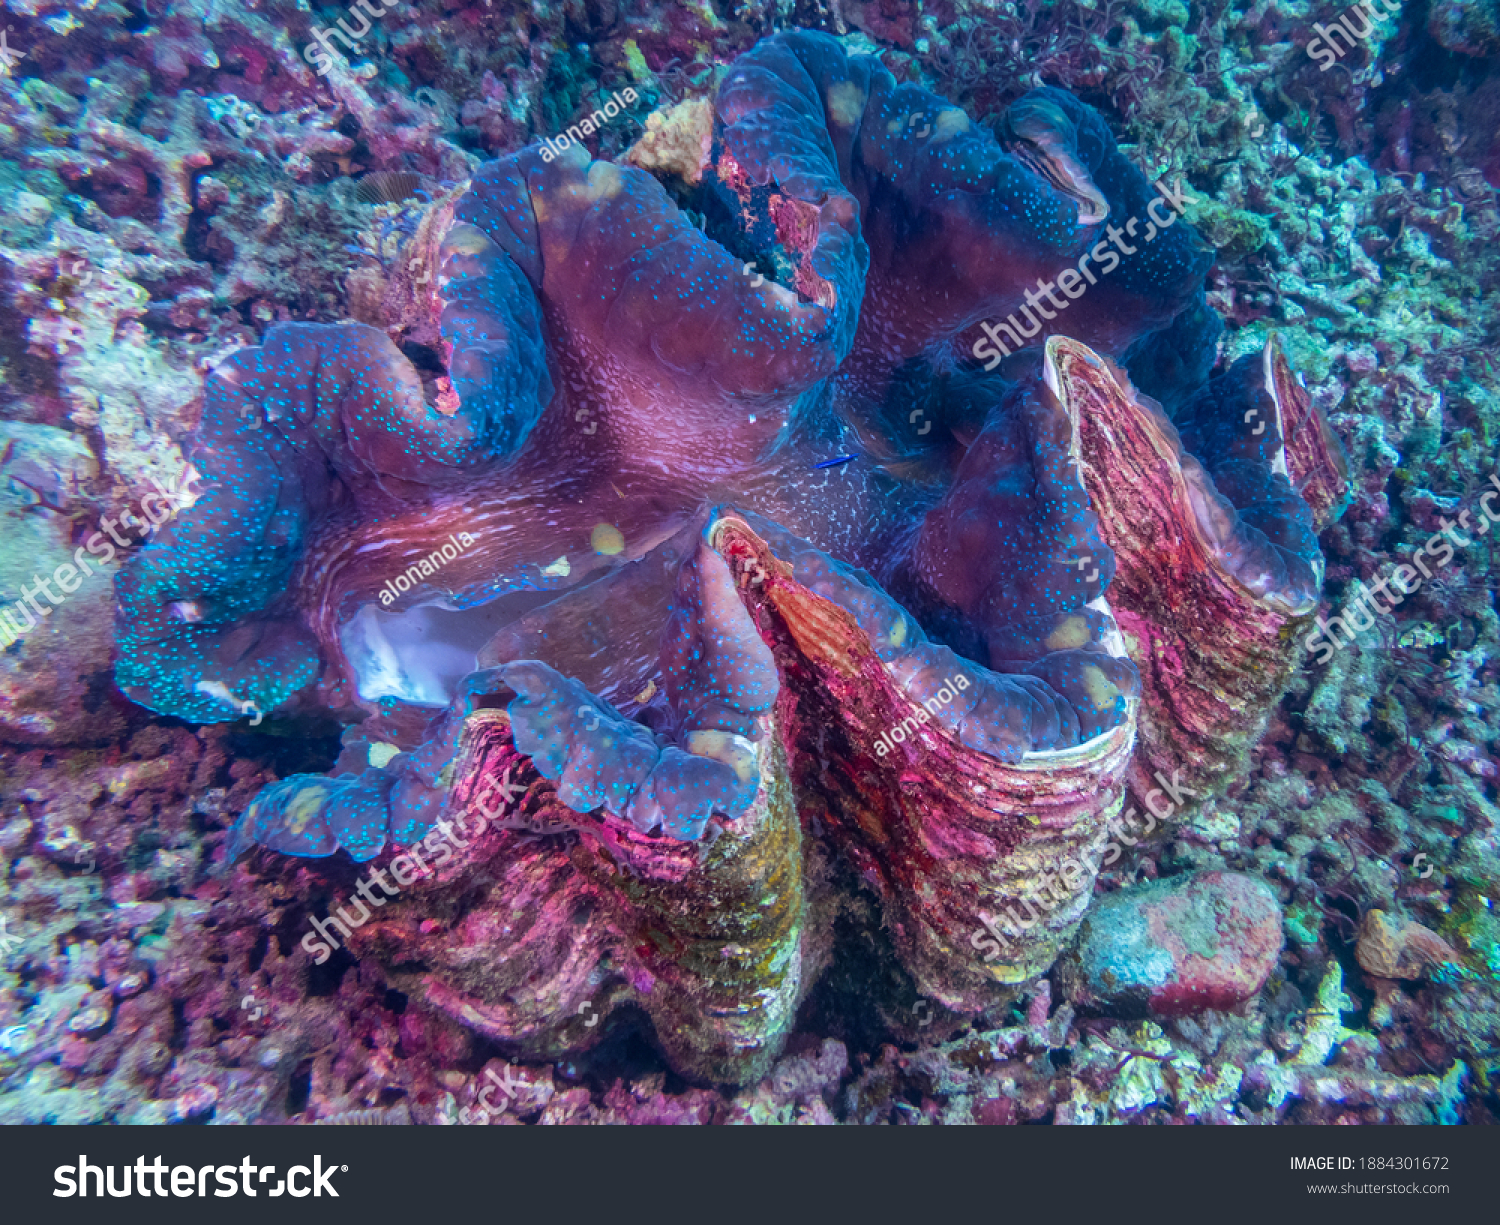 Giant clams (Tridacna gigas) are the largest living bivalve mollusks on a tropical coral reef near Anilao, Batangas, Philippines.  Underwater photography and marine life. #1884301672